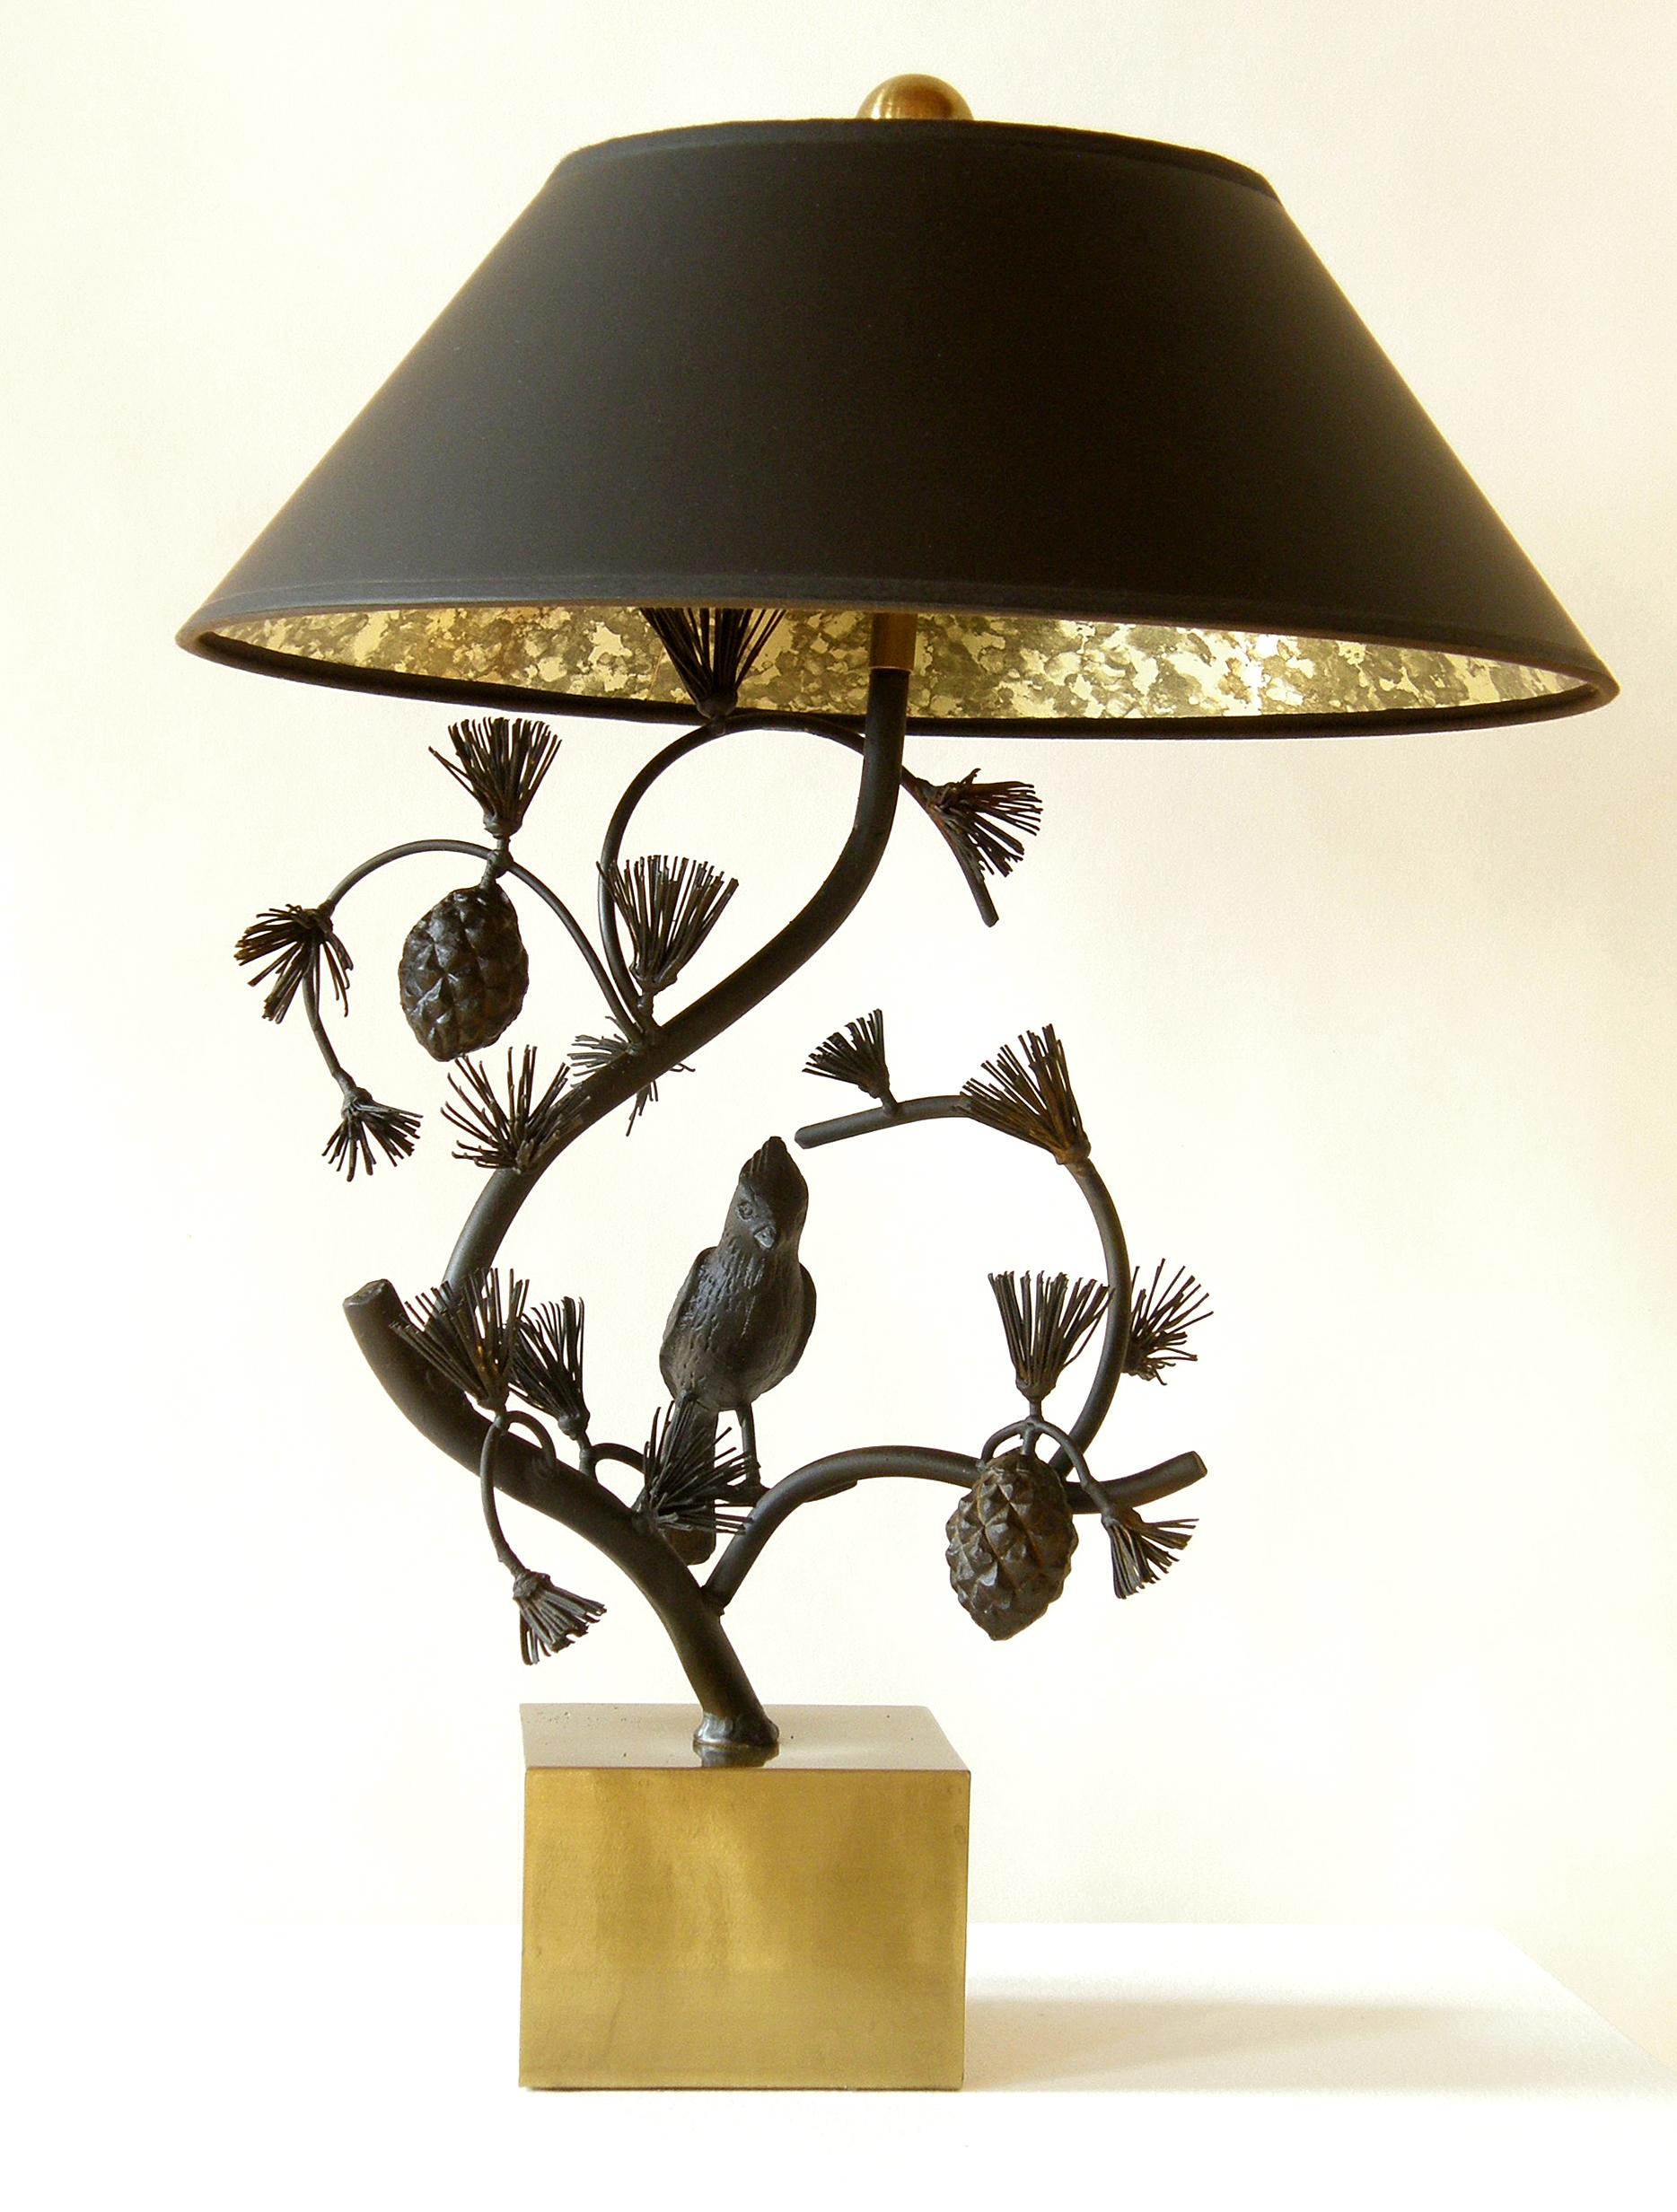 This sweet lamp by Chapman features a sculptural tree form in iron with a cardinal (?) perched on a branch. It has a natural style and pleasant asymmetry. The cube base is brass, and the black shade is lined with gold and black mottled paper. The